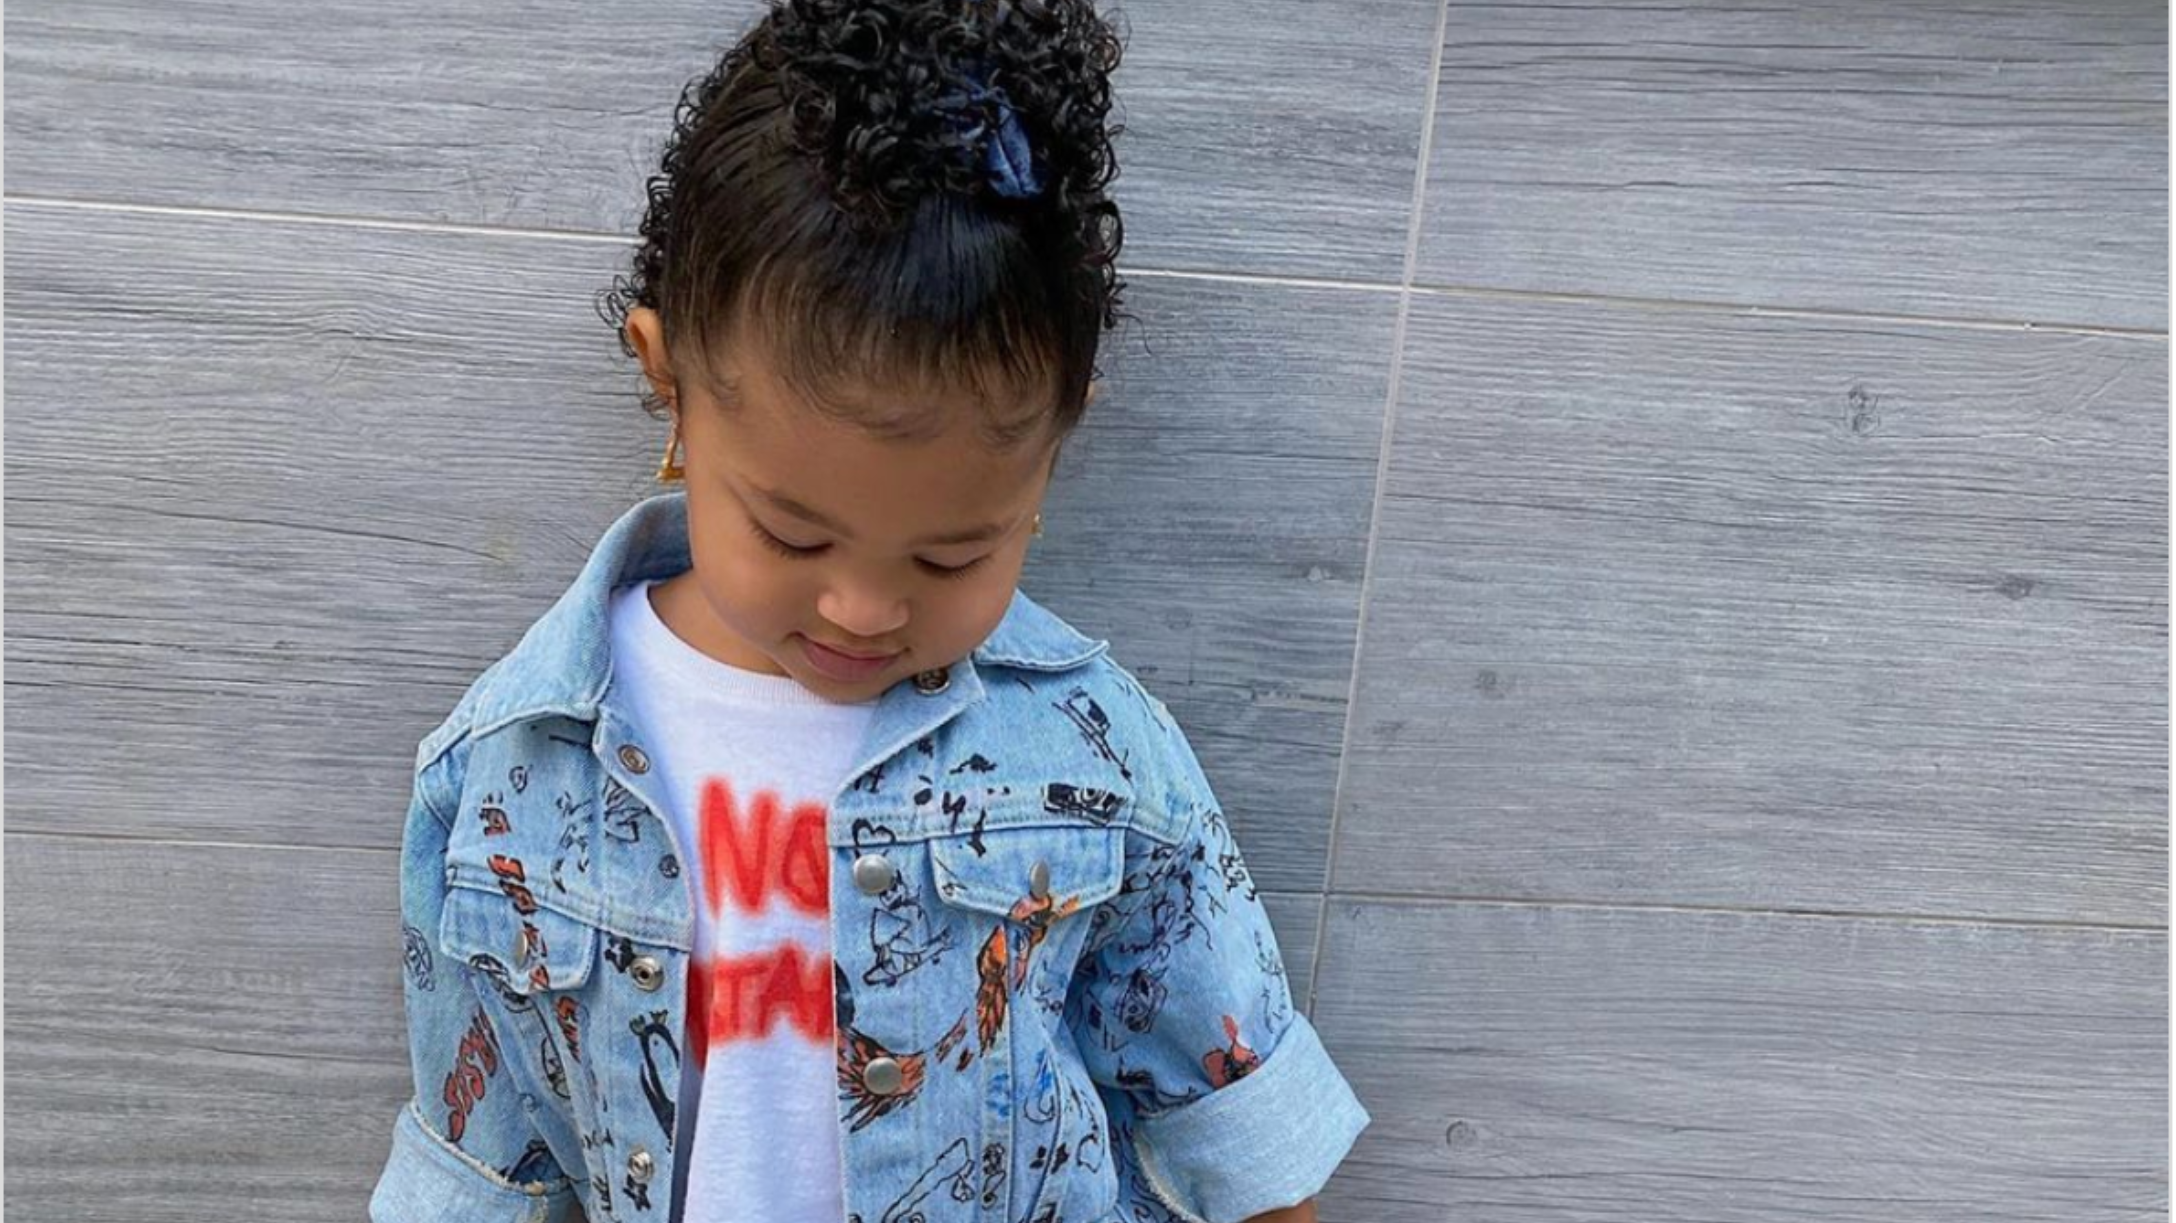 Let's Talk About Kylie Jenner's Daughter Stormi's New Louis